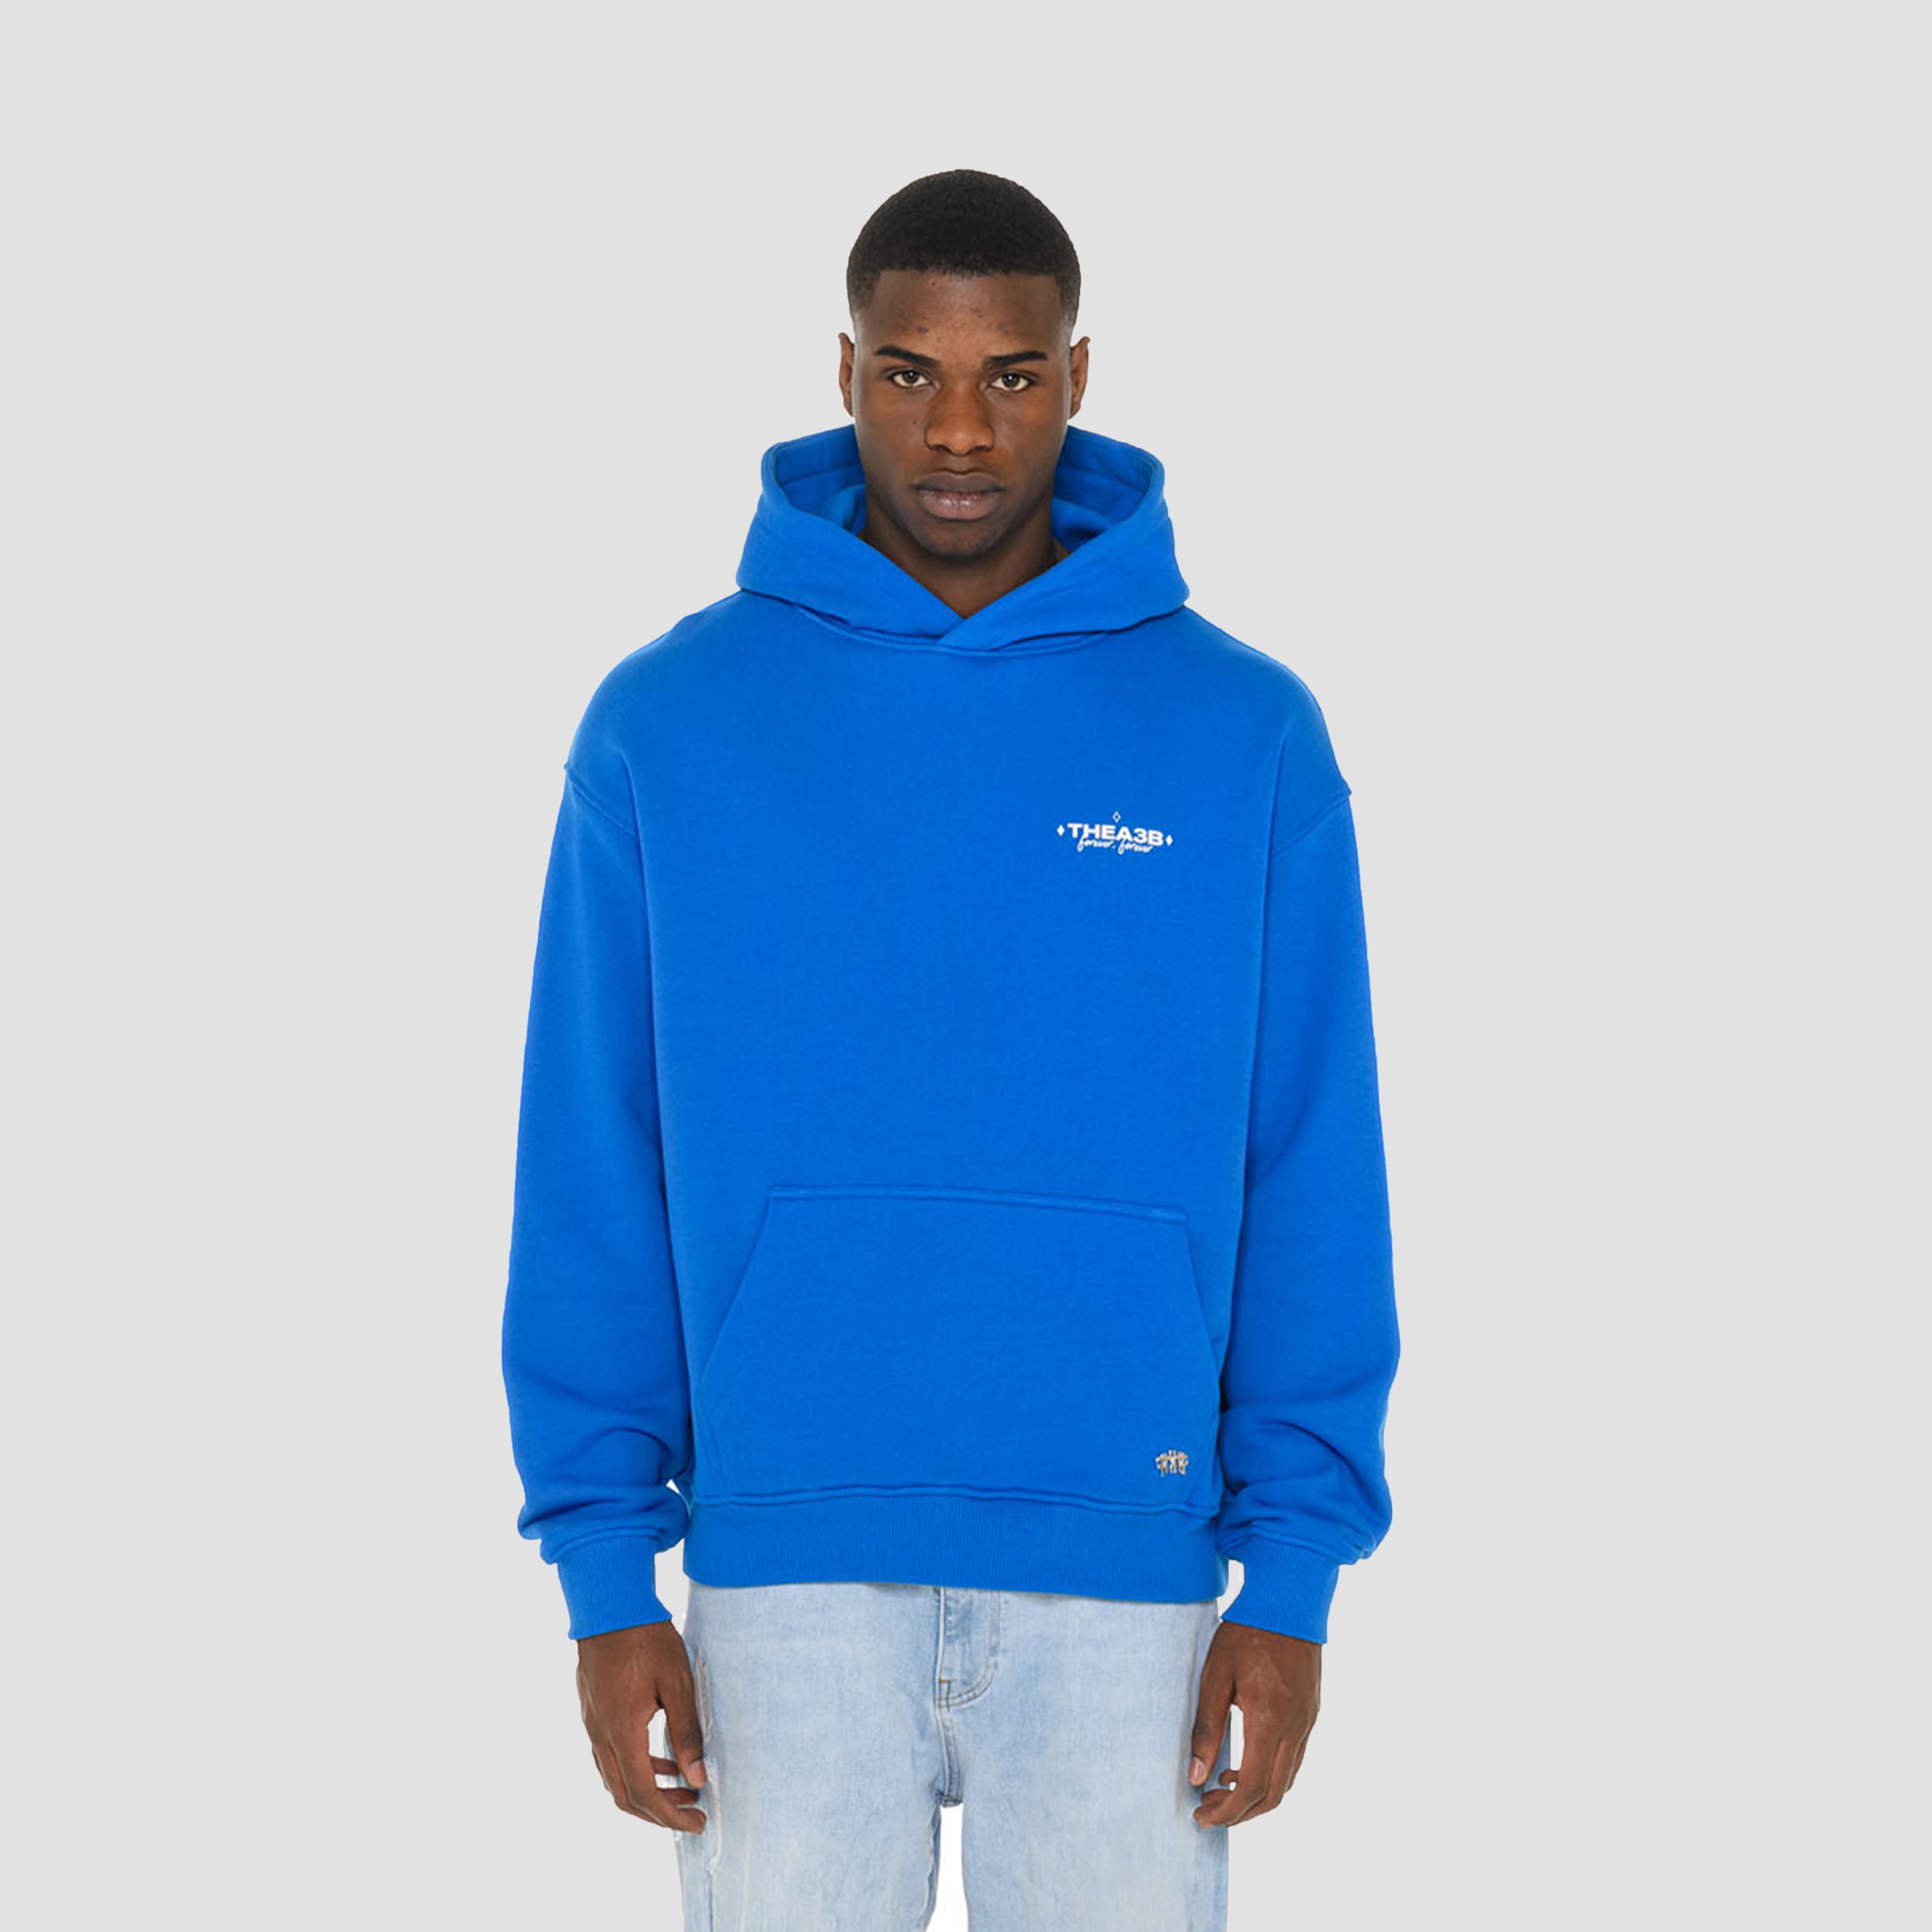 FOREVER, FOREVER HOODIE - BLUE - A3B